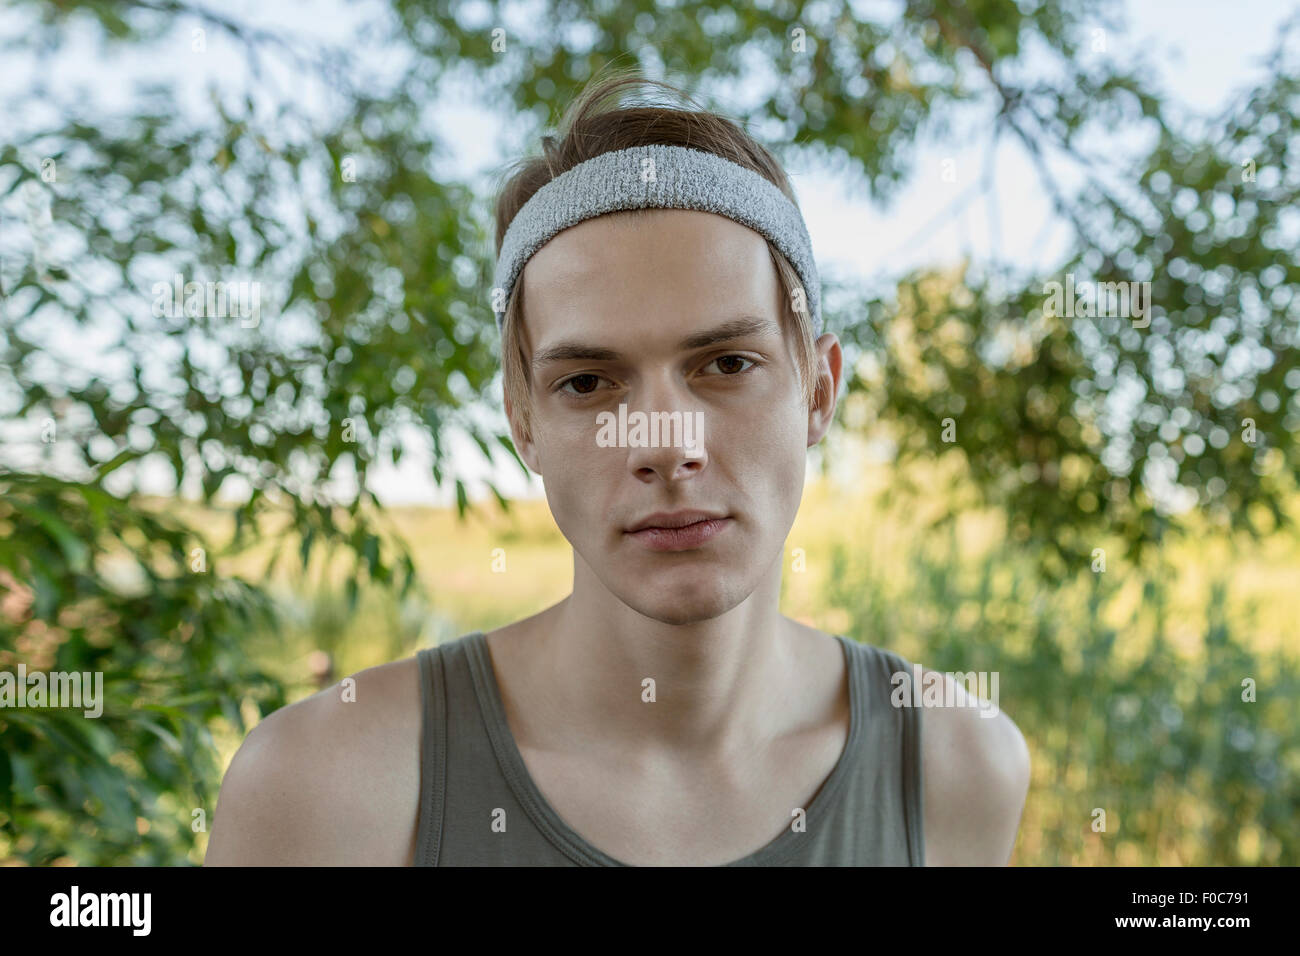 Portrait of handsome young man outdoors Stock Photo